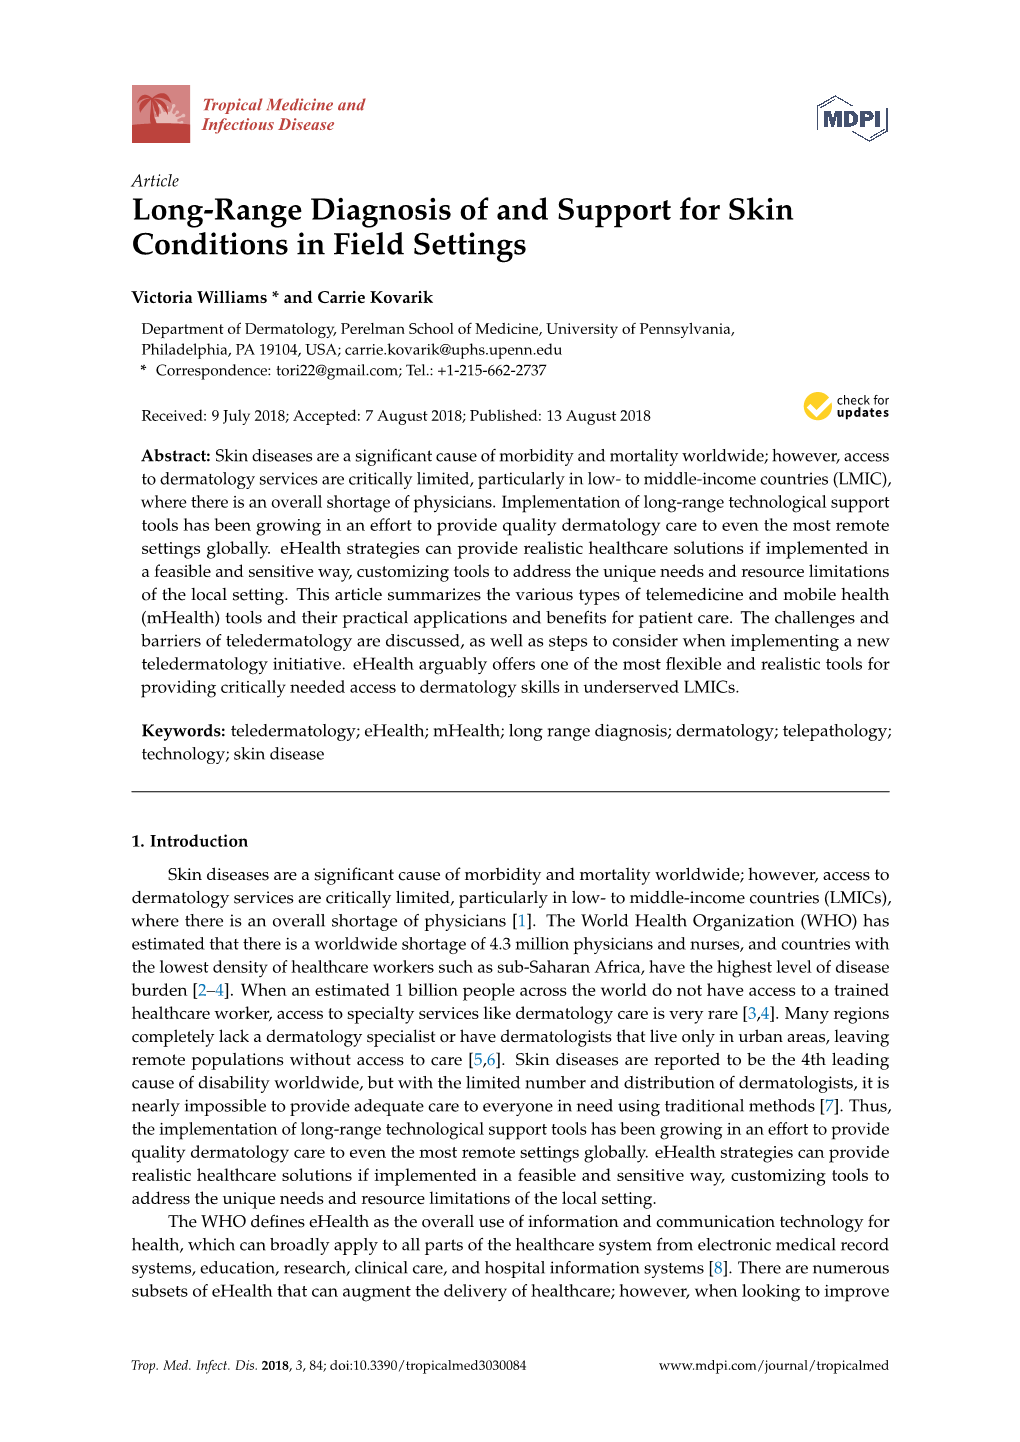 Long-Range Diagnosis of and Support for Skin Conditions in Field Settings